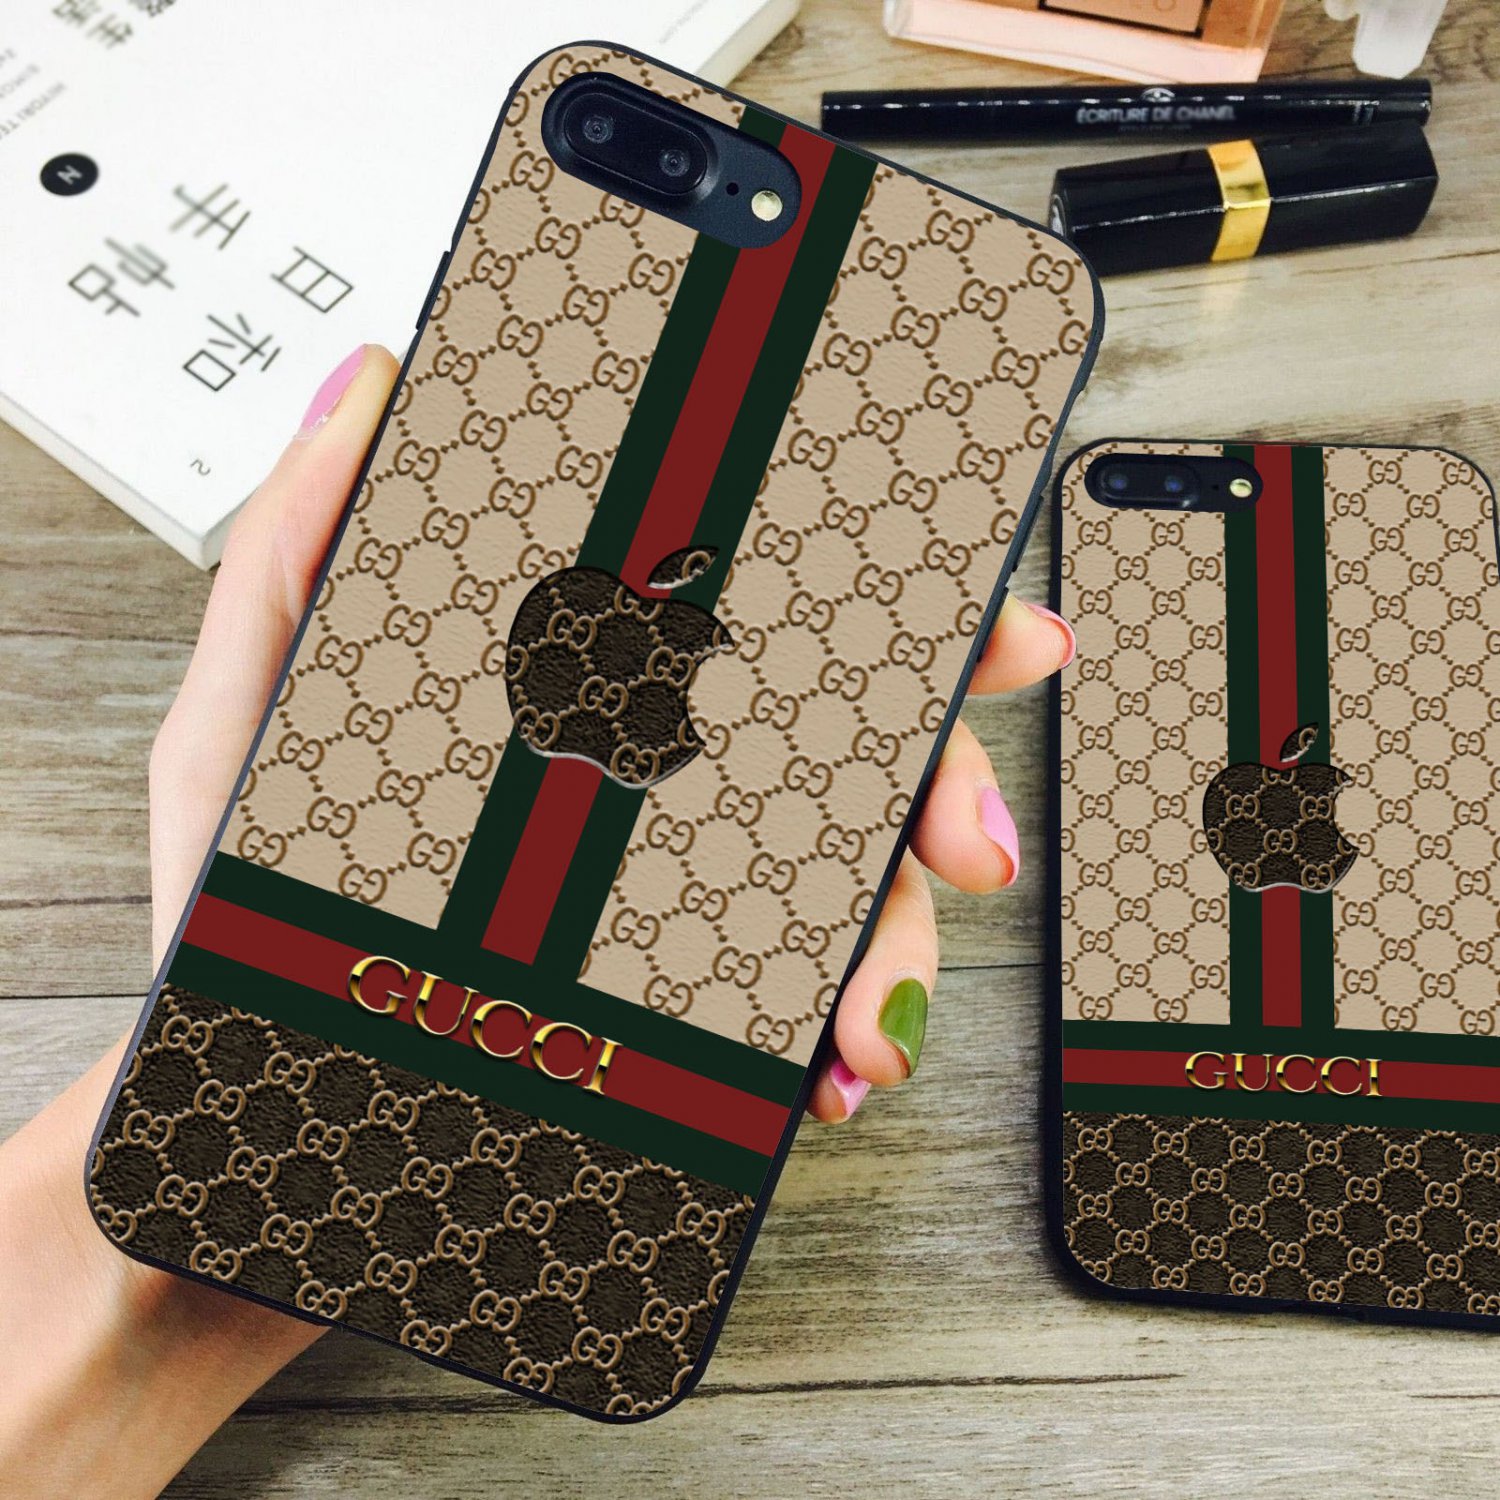 Gucci Limited New Copy4b M7K iPhone 11 PROMAX Cases